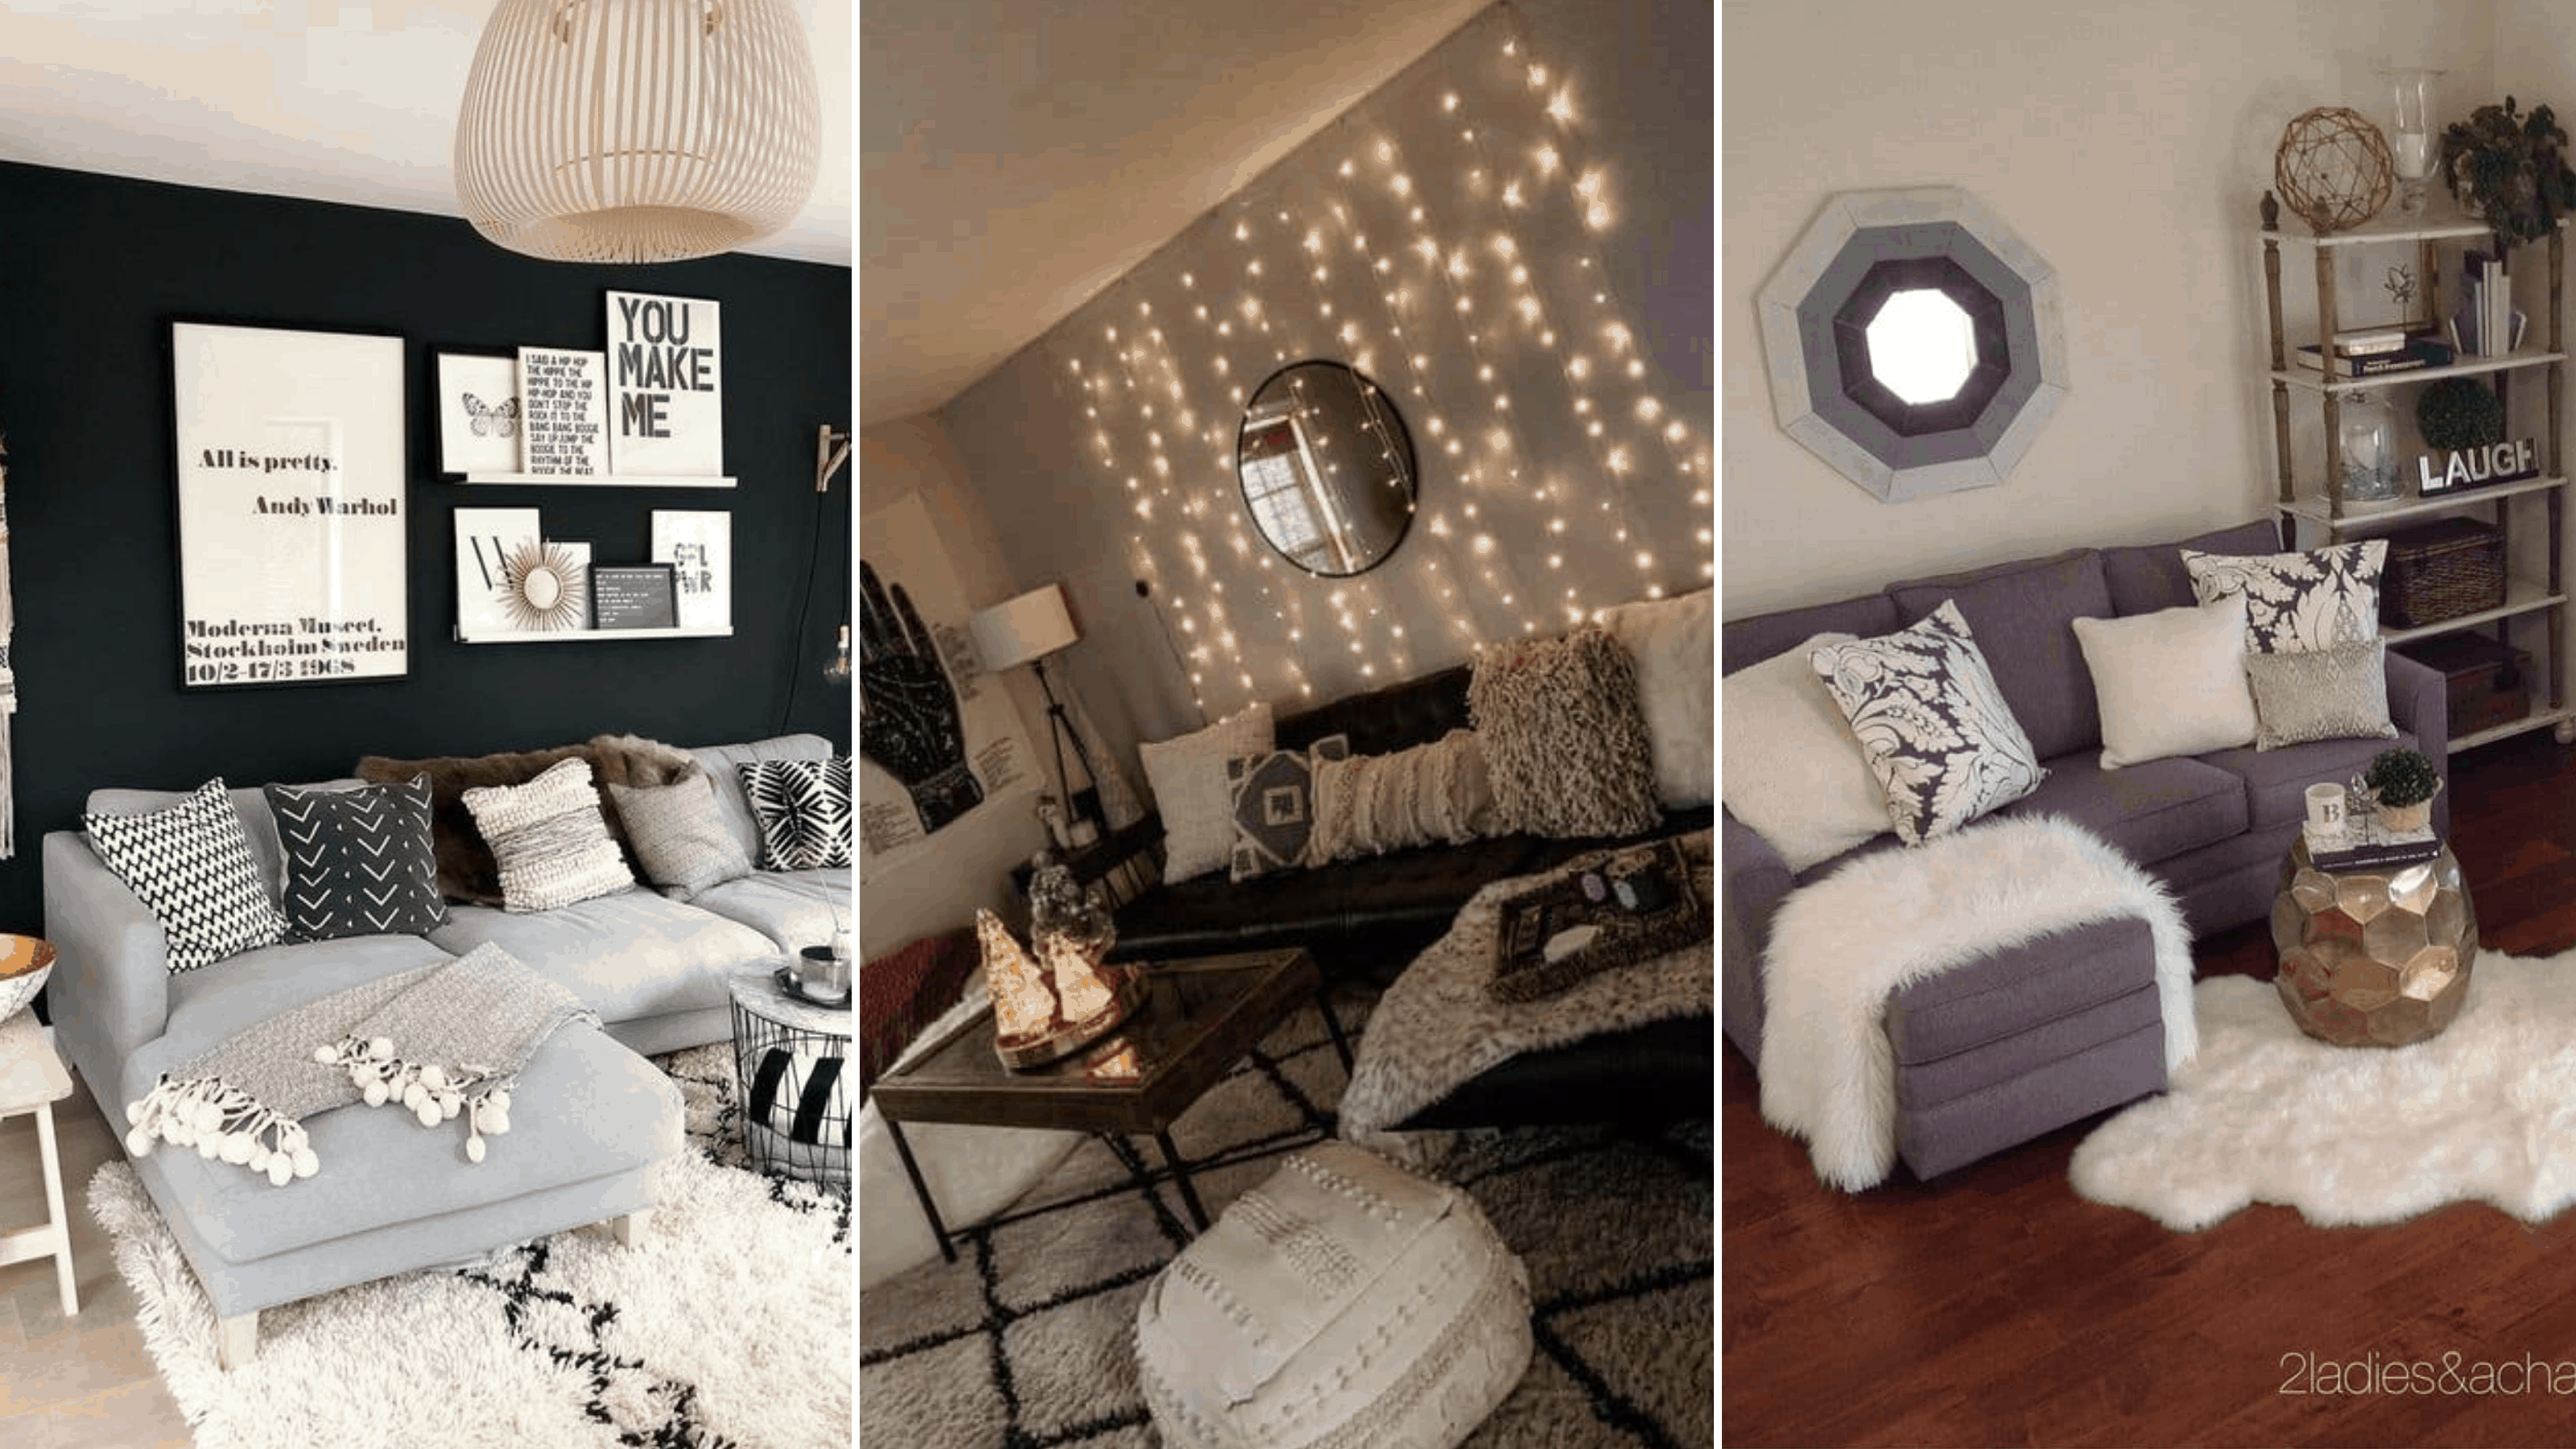 24 Genius College Apartment Decorating Ideas On A Budget By